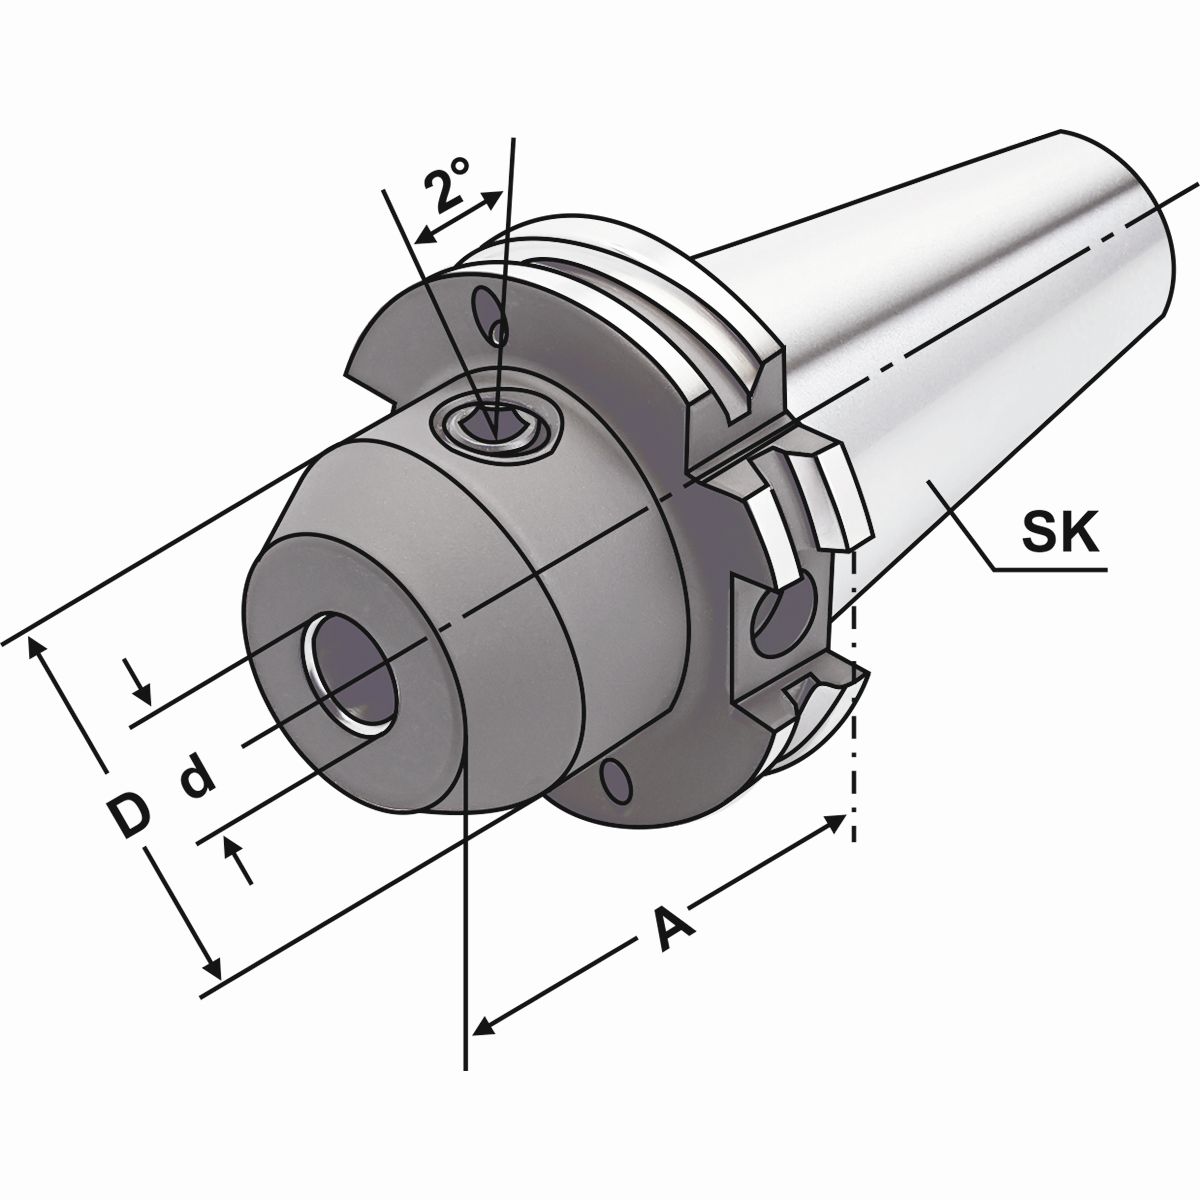 Whistle Notch SK 40-25-100 DIN 69871 AD/B